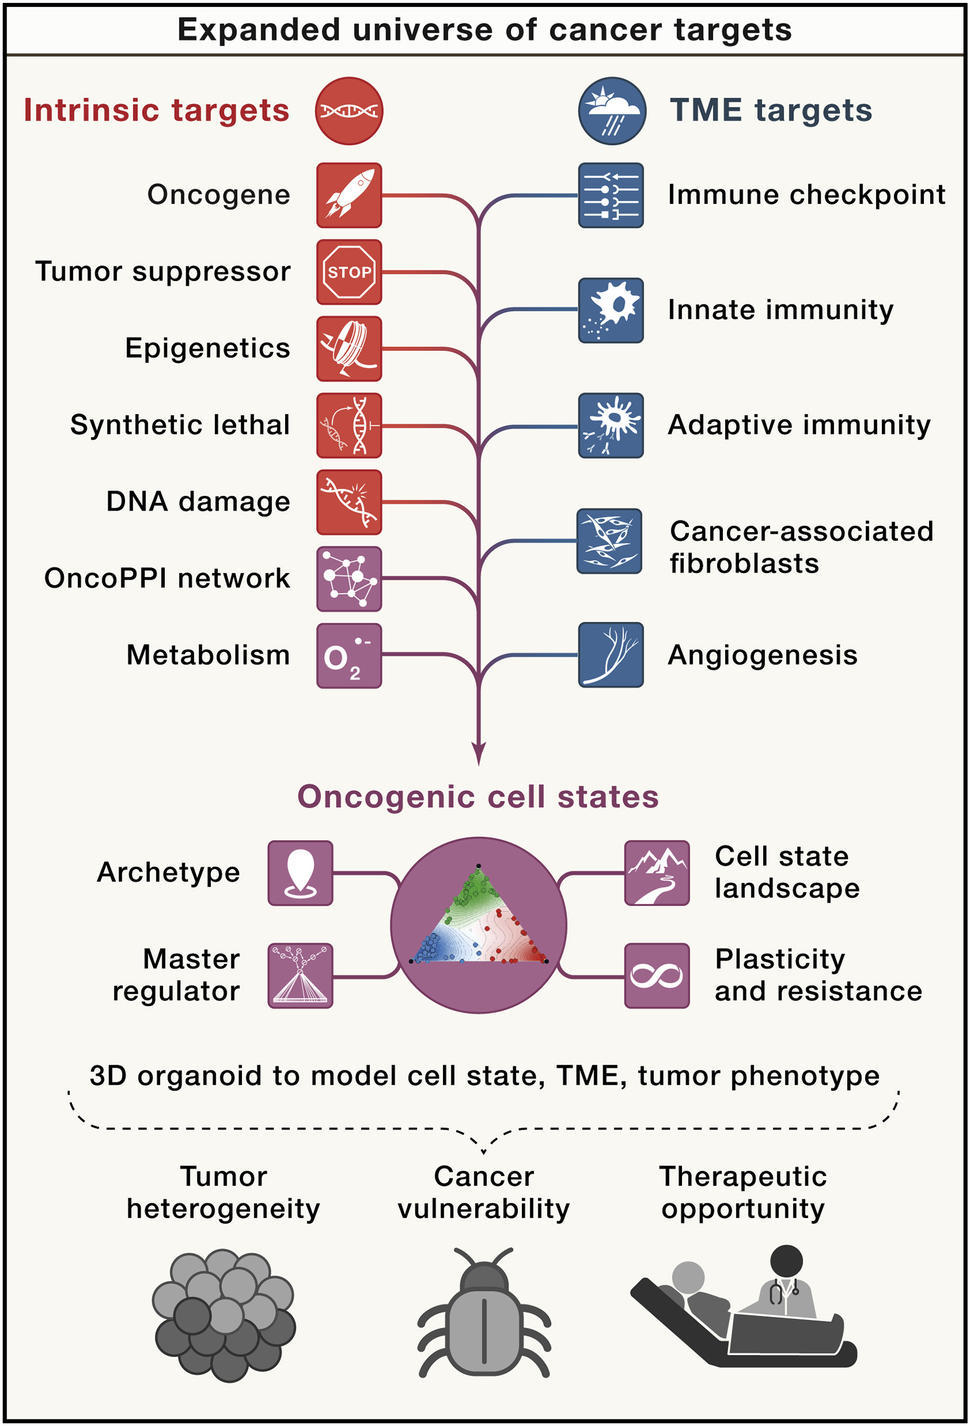 Diagram of an expanded "universe" of cancer targets with tumor intrinsic and extrinsic, and emerging targets represented.